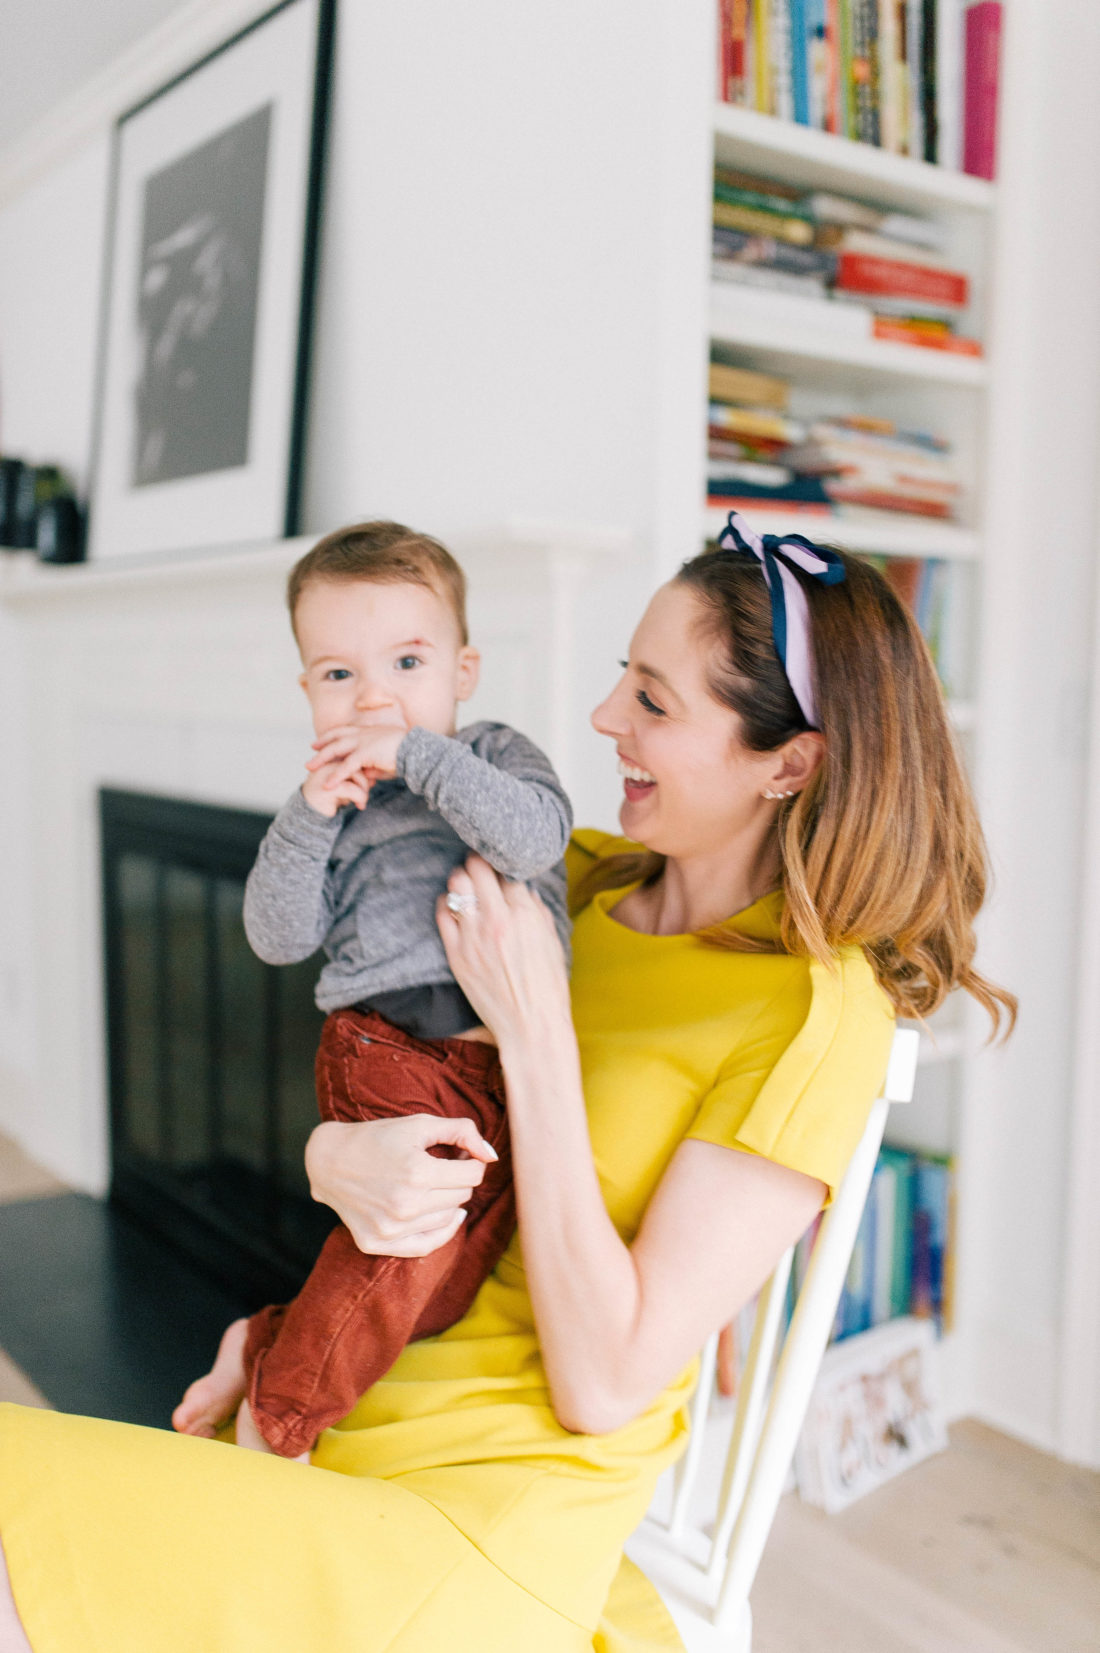 Eva Amurri Martino holds one year old son Major Martino in the kitchen of her Connecticut home